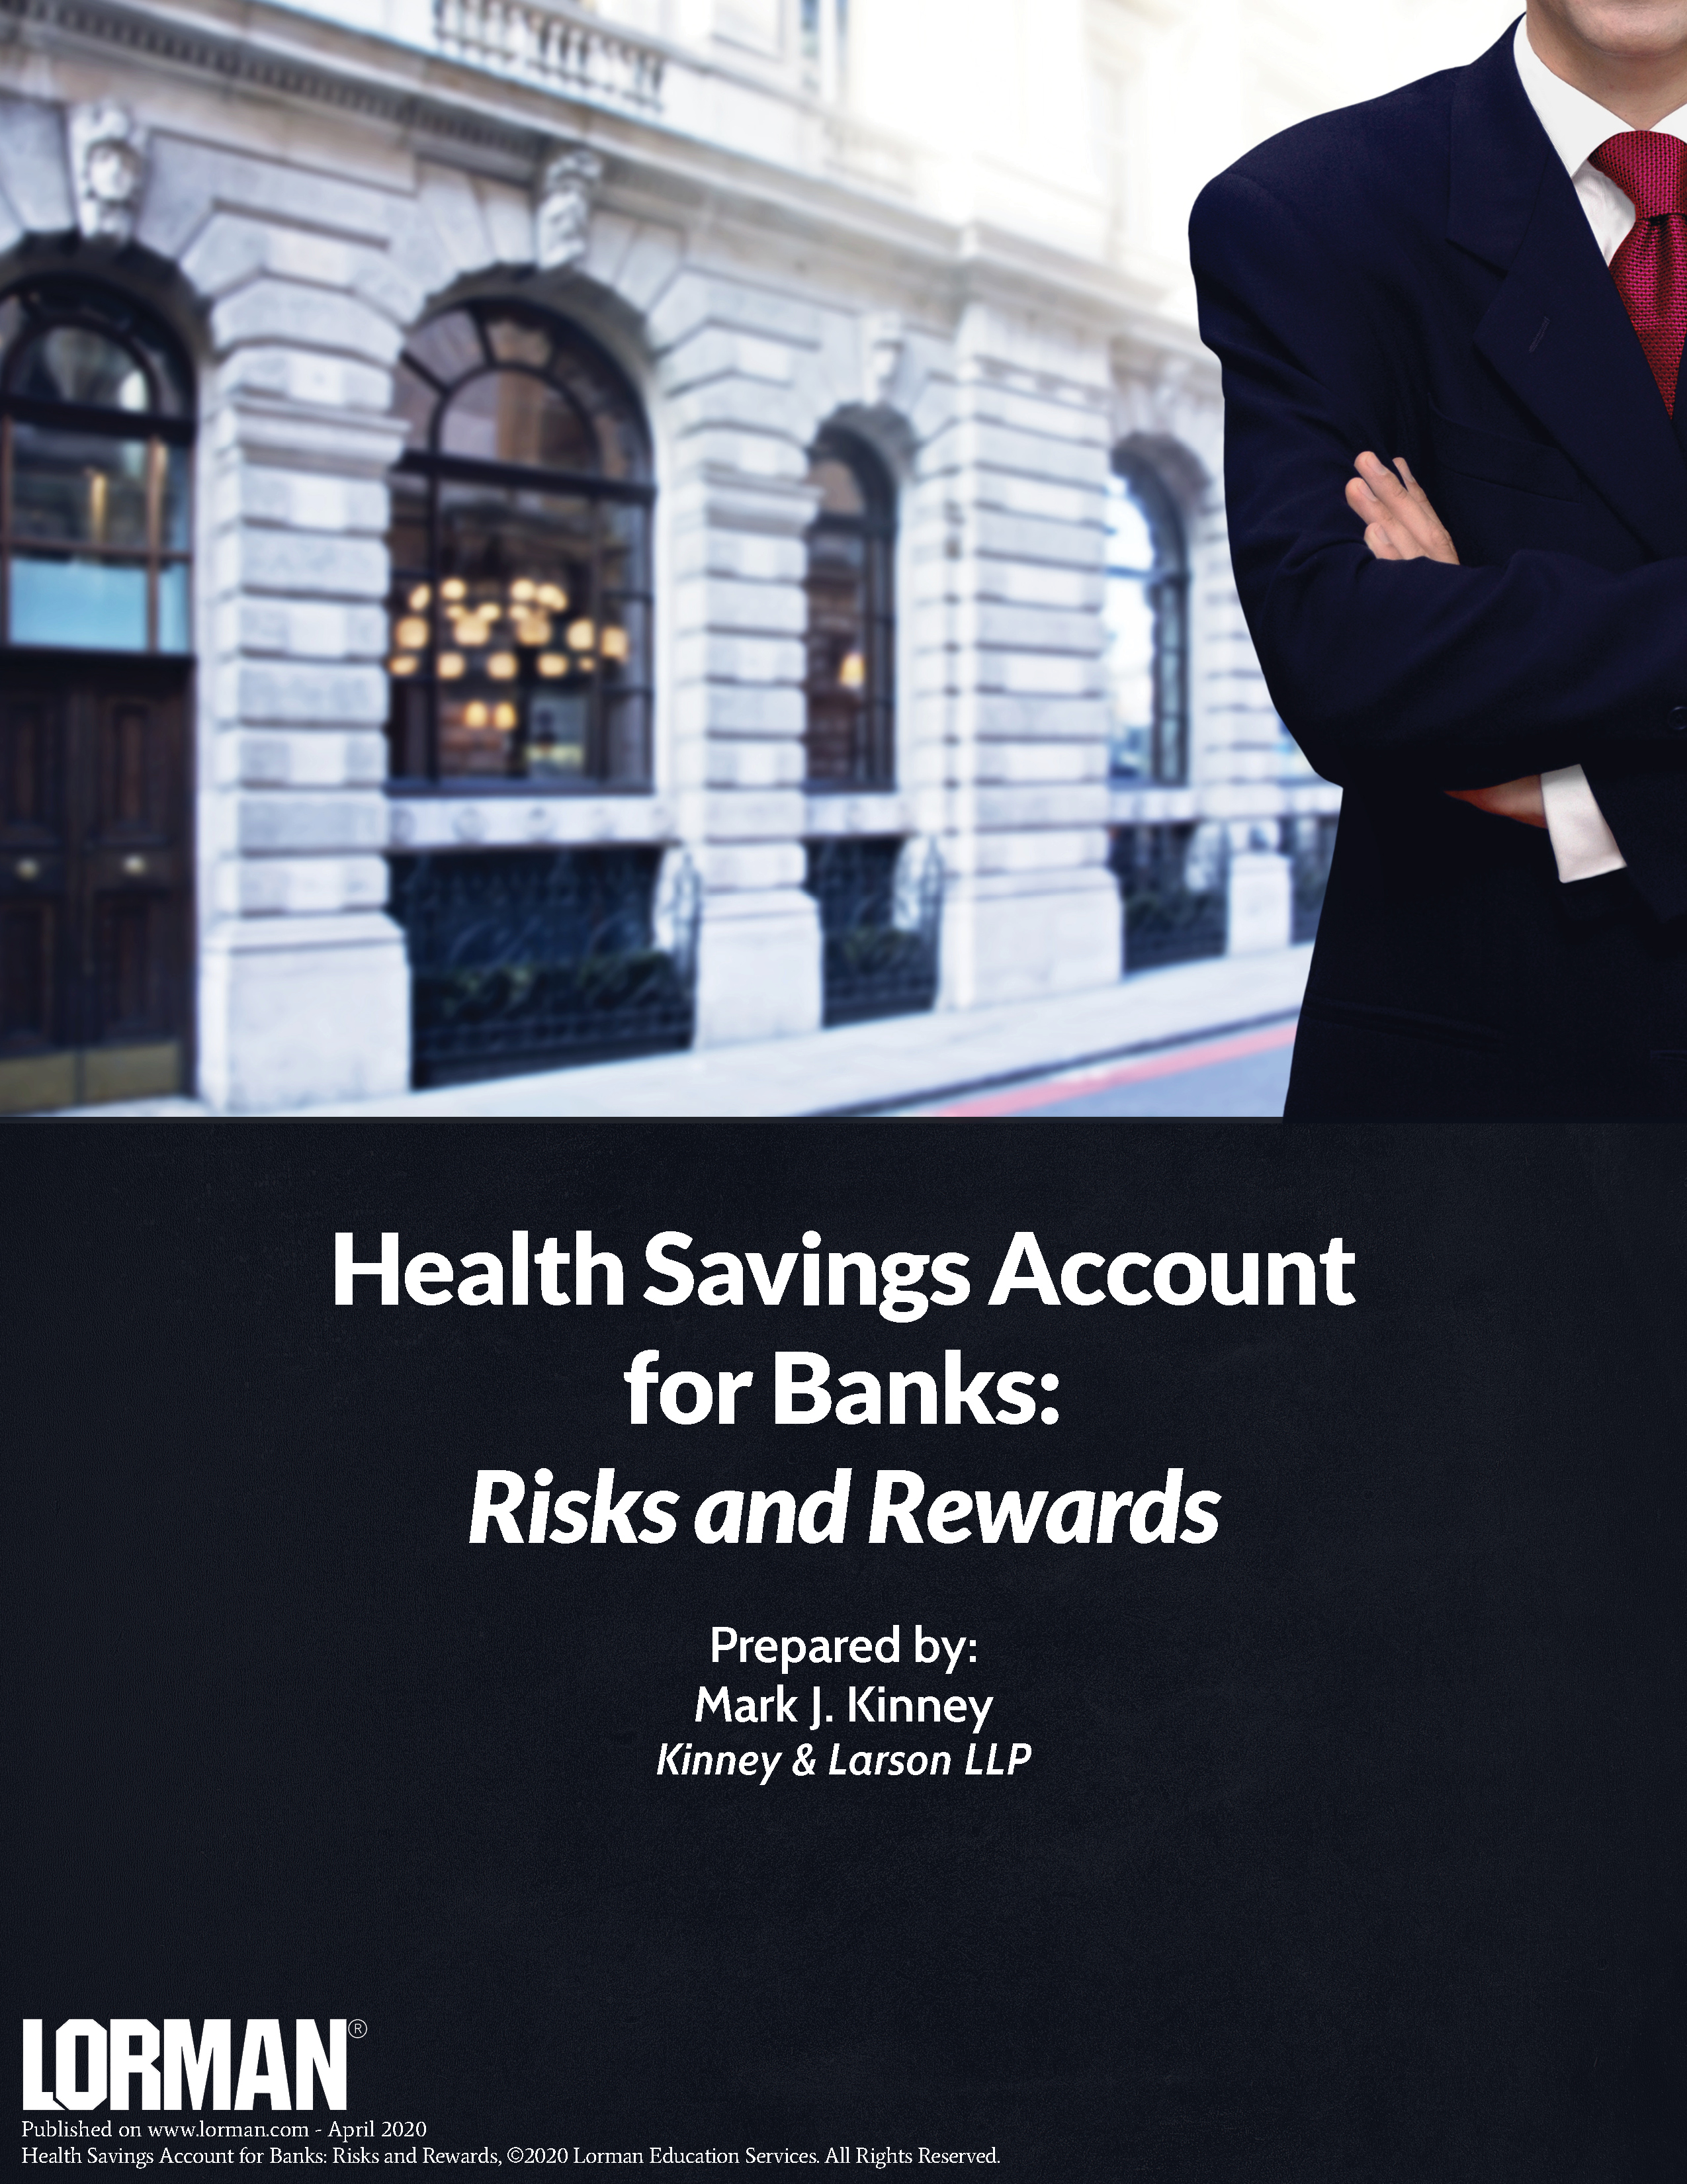 Health Savings Account for Banks: Risks and Rewards